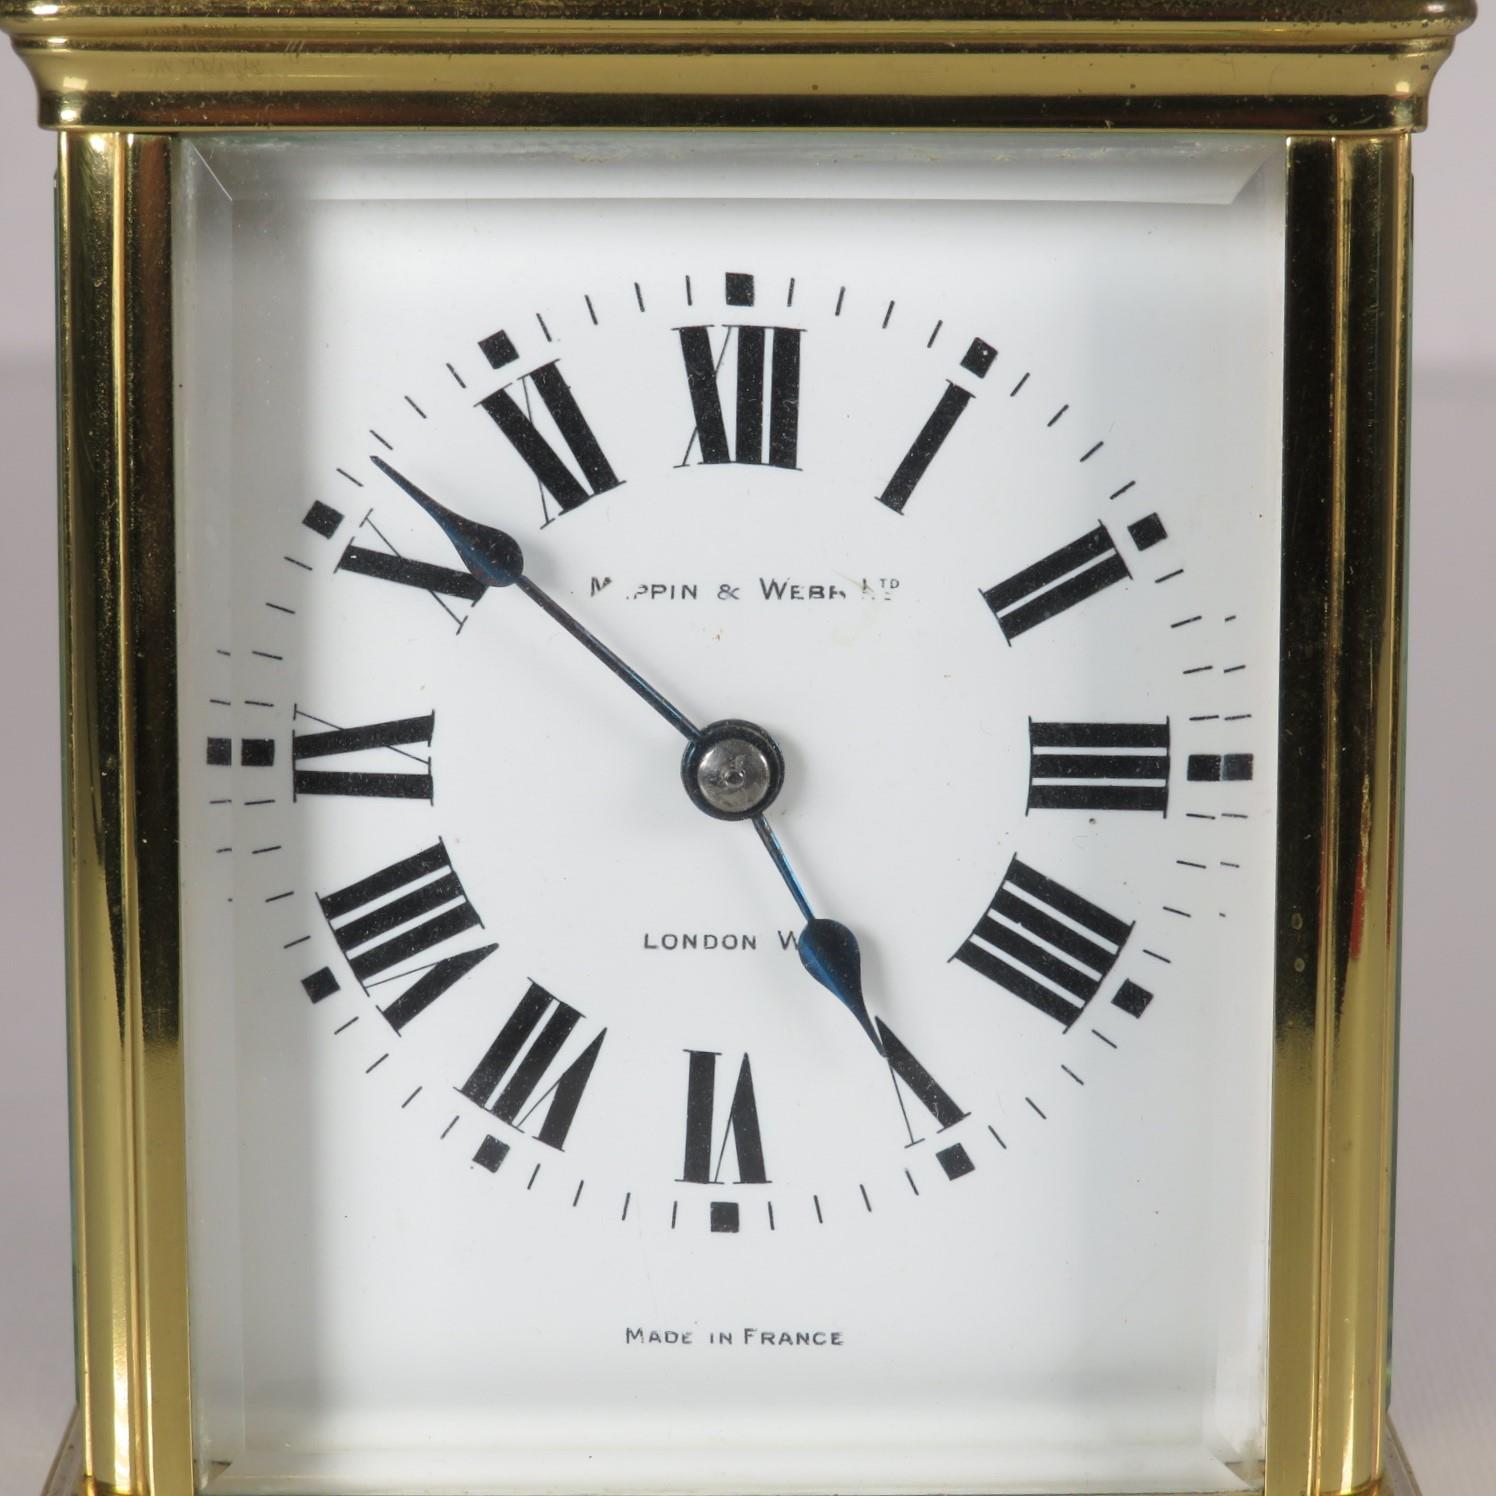 A midsize French movement carriage clock. Clock runs. 120mm x 80mm // - Image 2 of 6